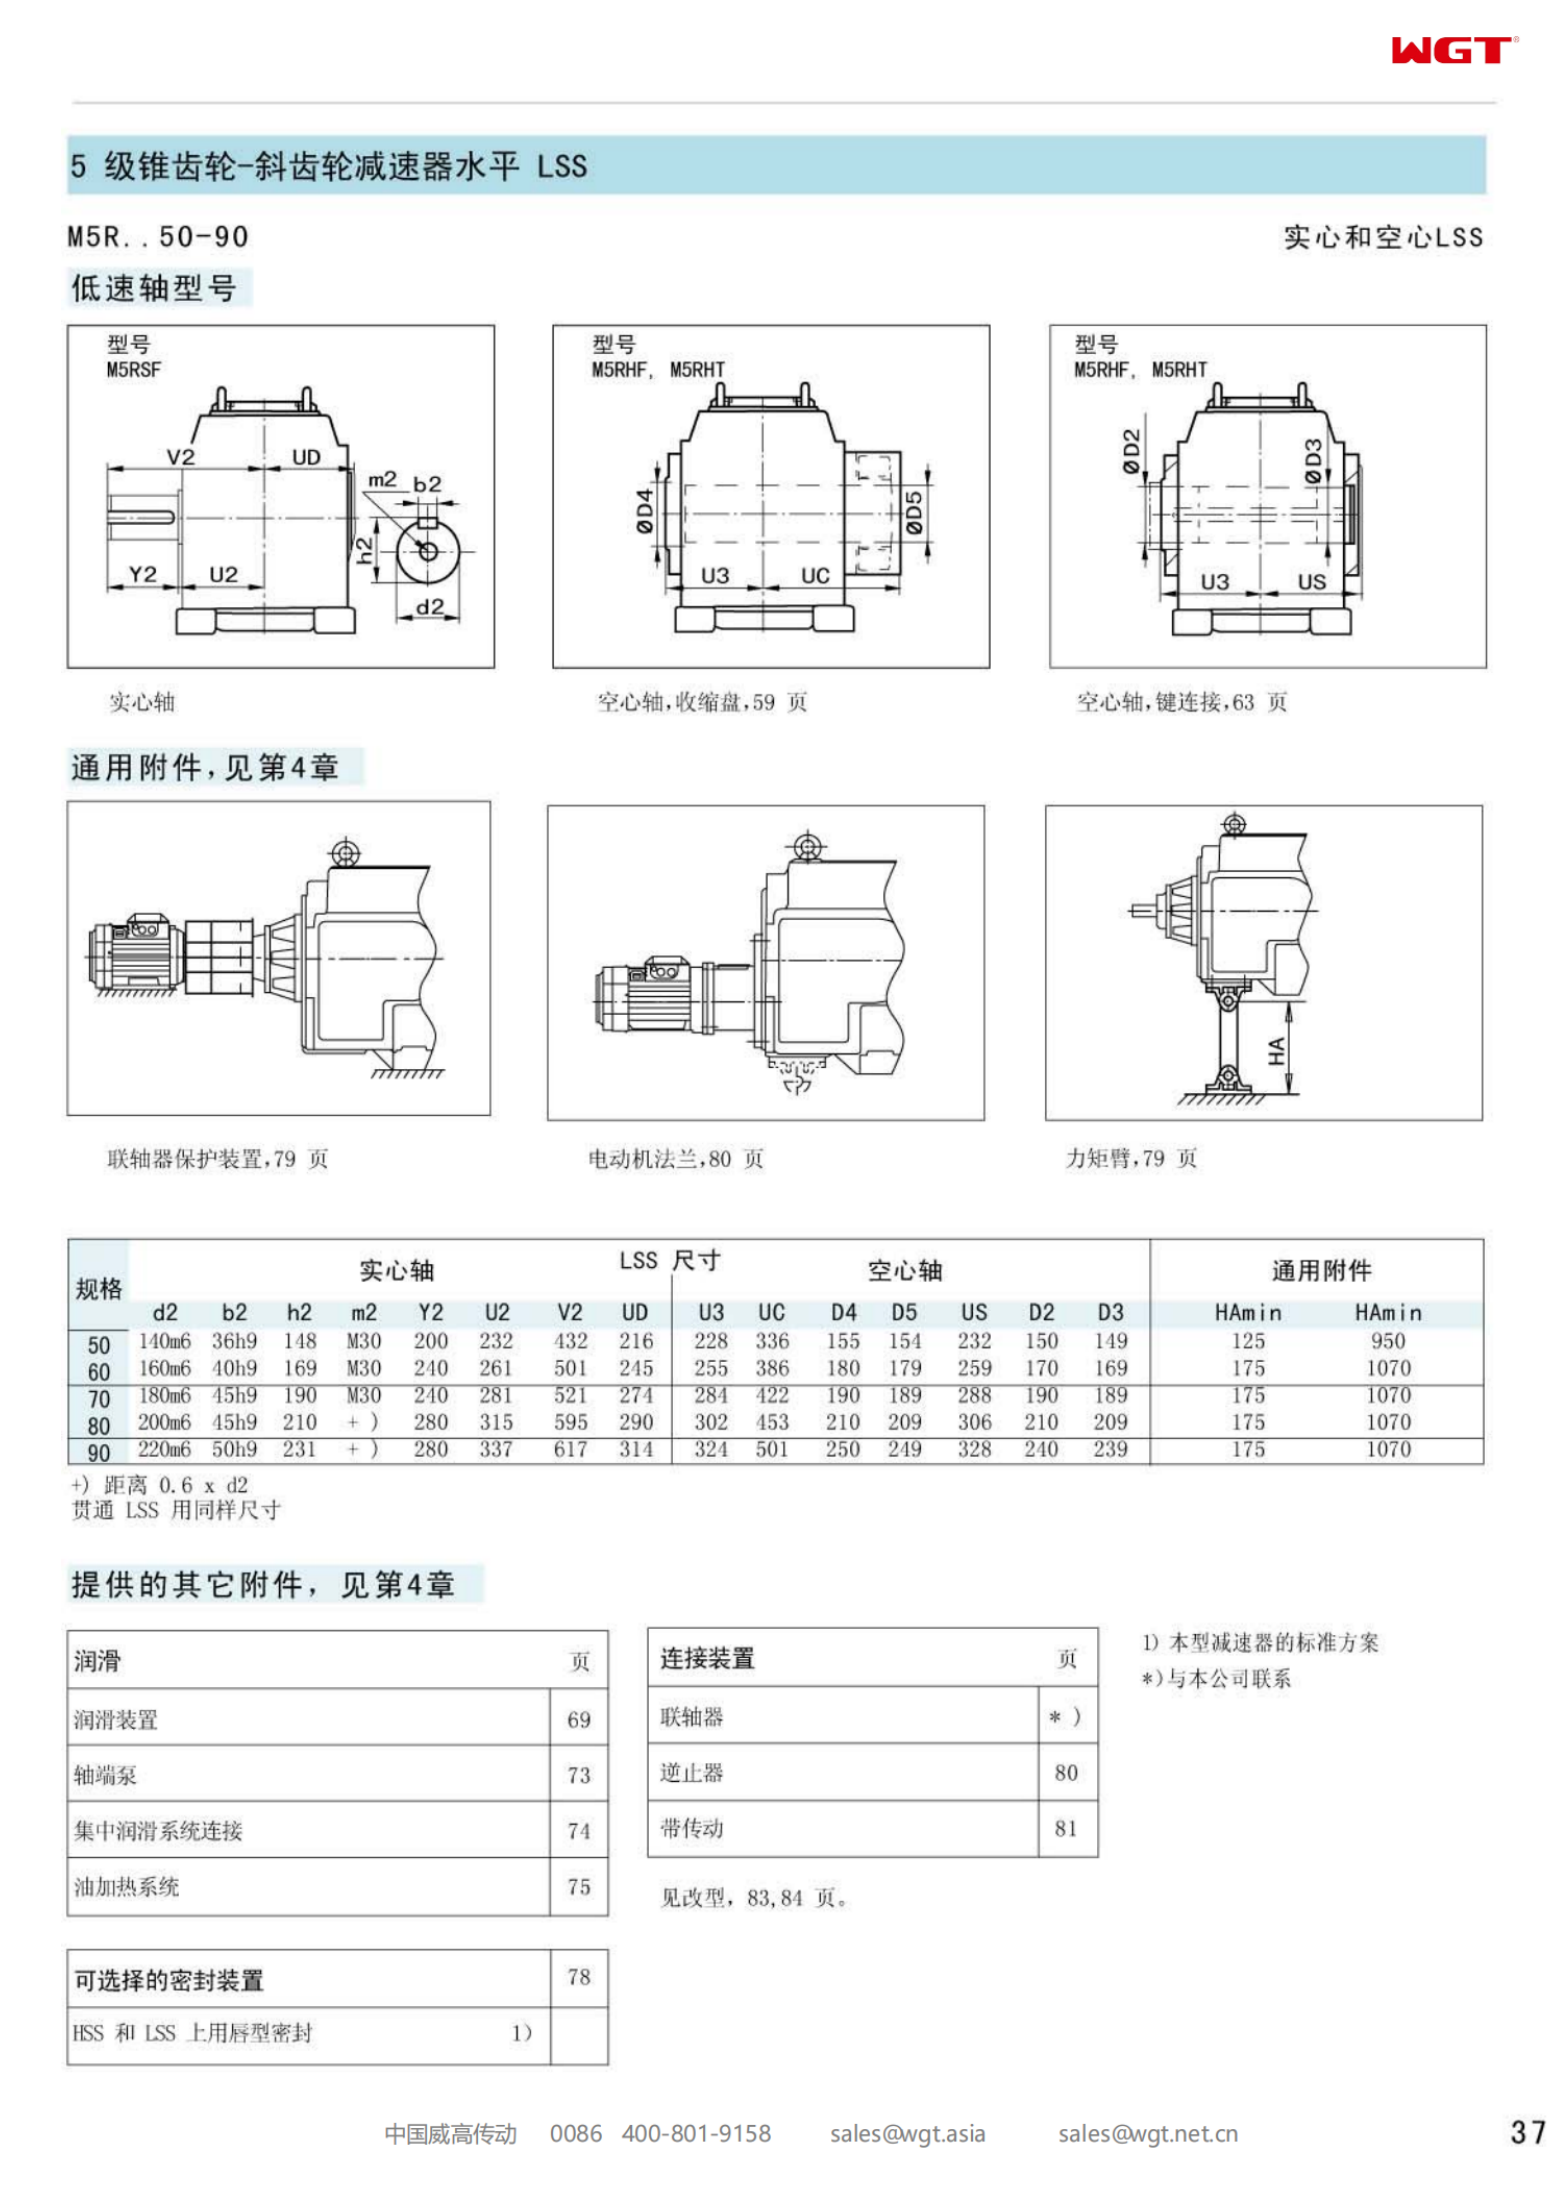 M2PVSF20 Replace_SEW_M_Series Gearbox